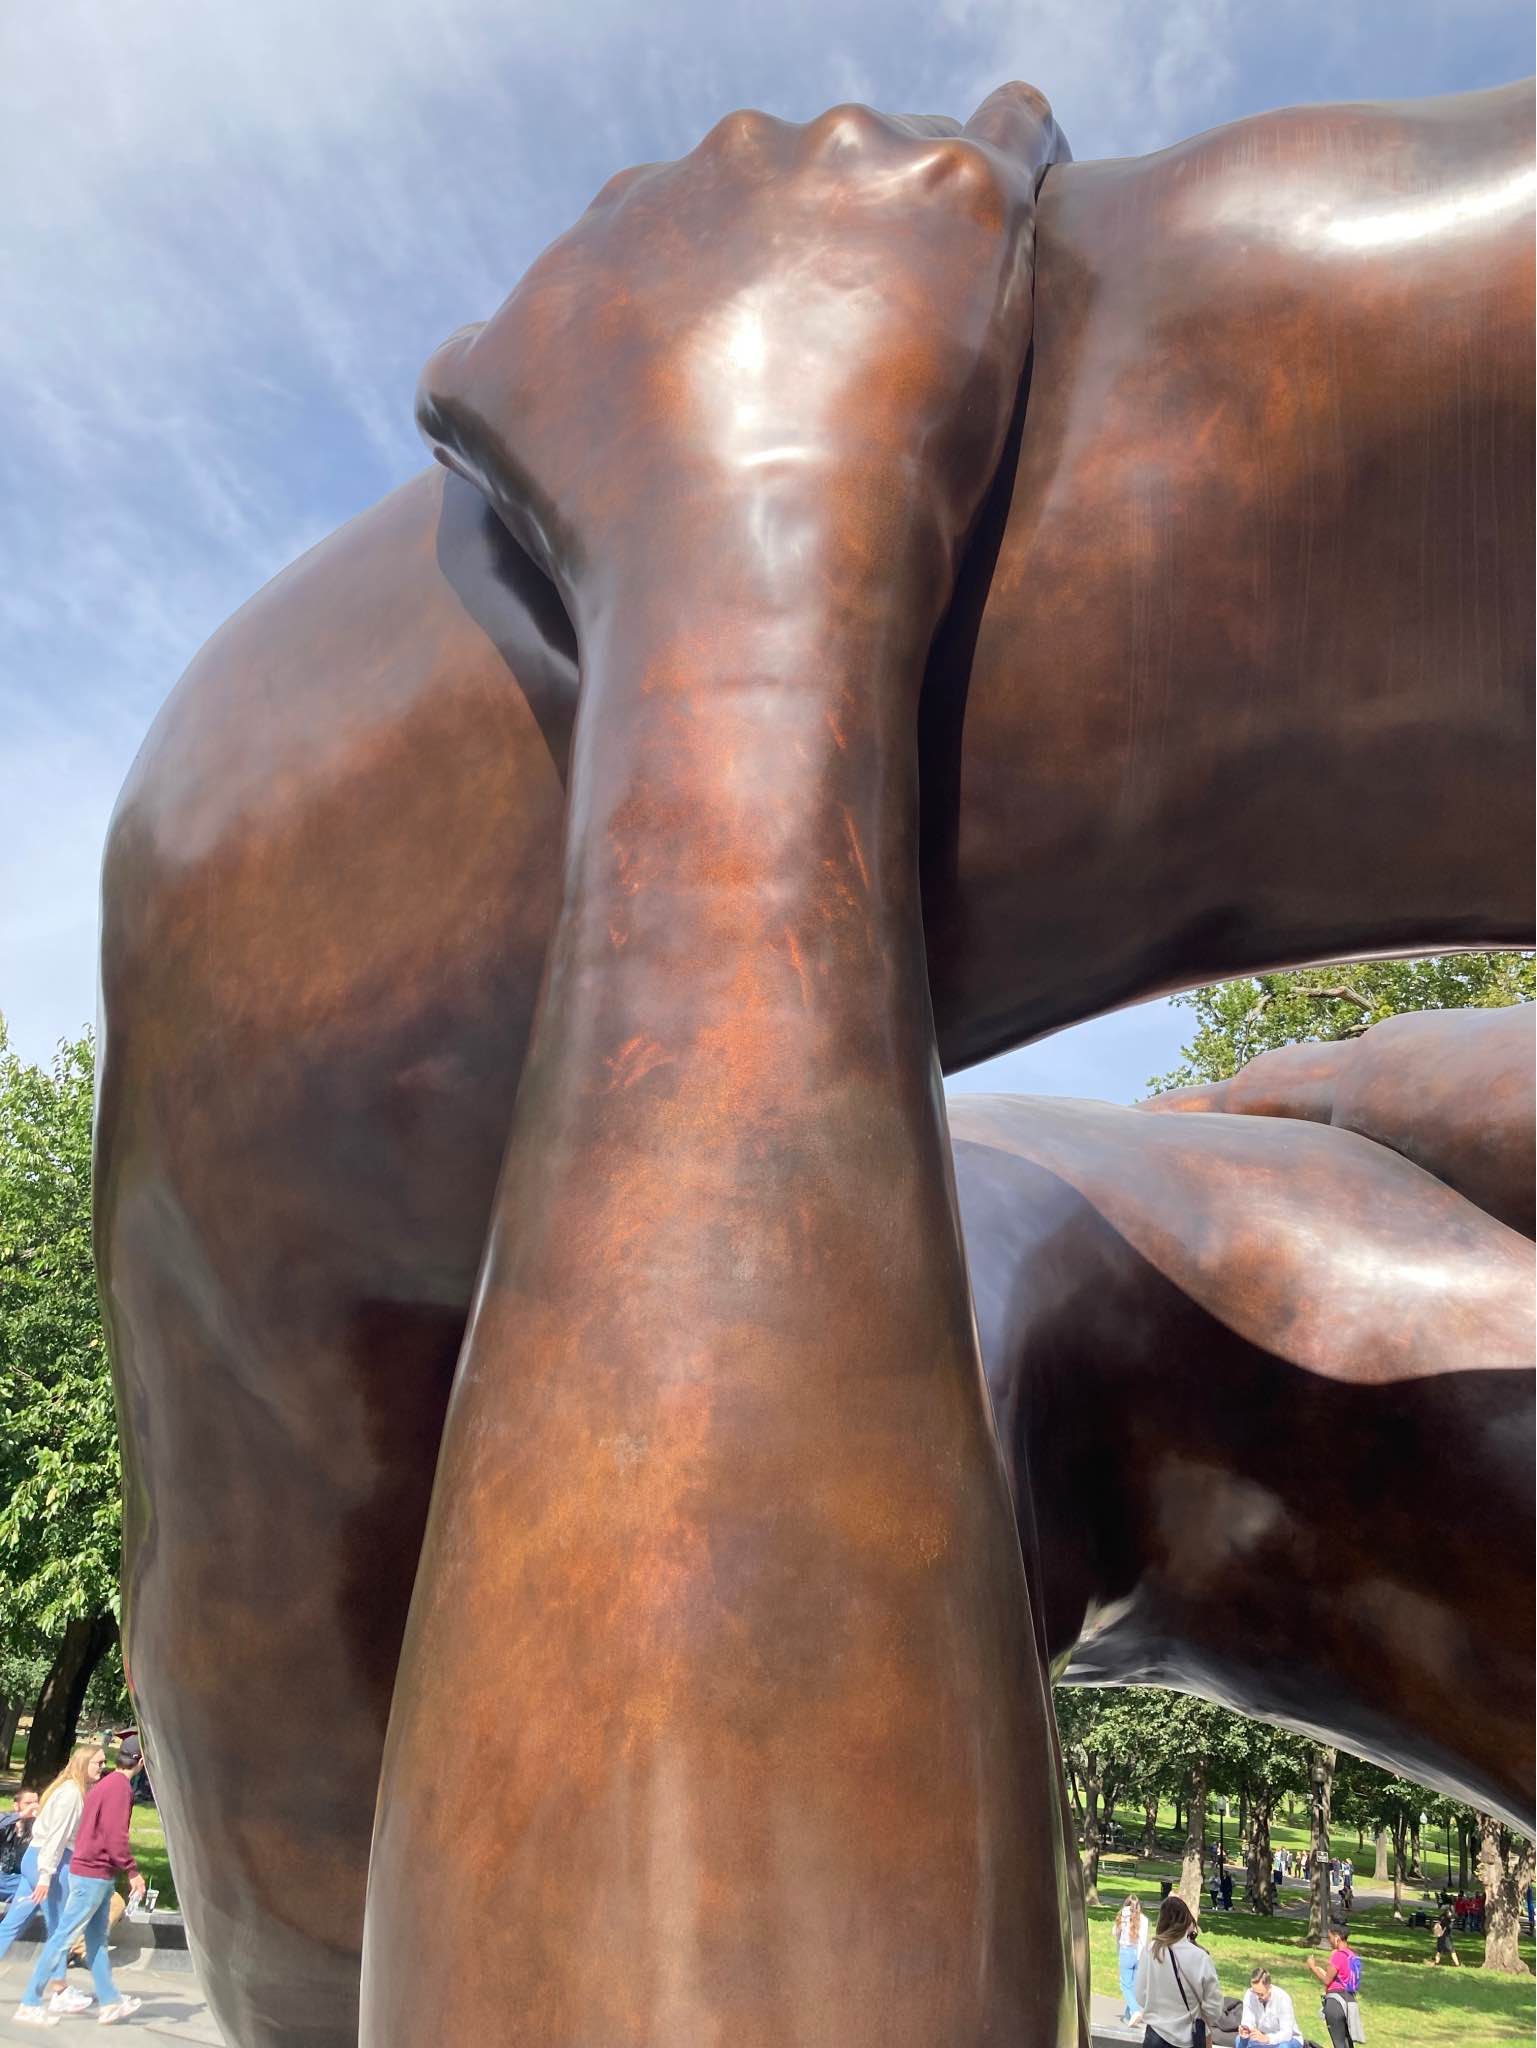 Photo of a huge bronze statue titled "The Embrace" honoring Martin Luther King, Jr. and Coretta Scott King, located on Boston Common on a sunny blue-sky day.